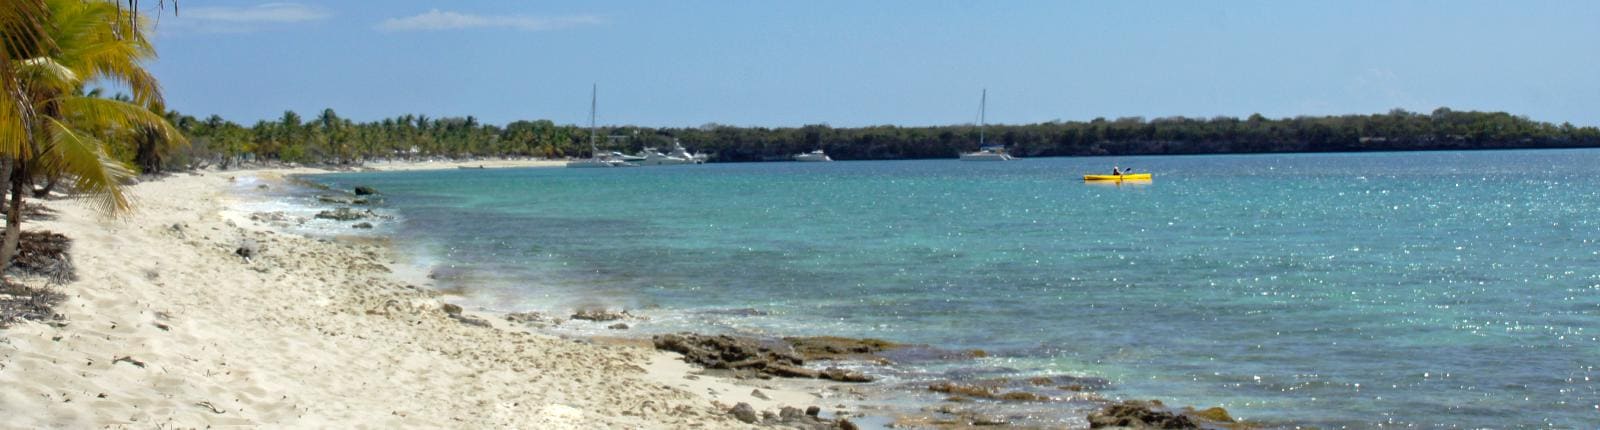 View of a beach during the day with a Kayak visible in the distance